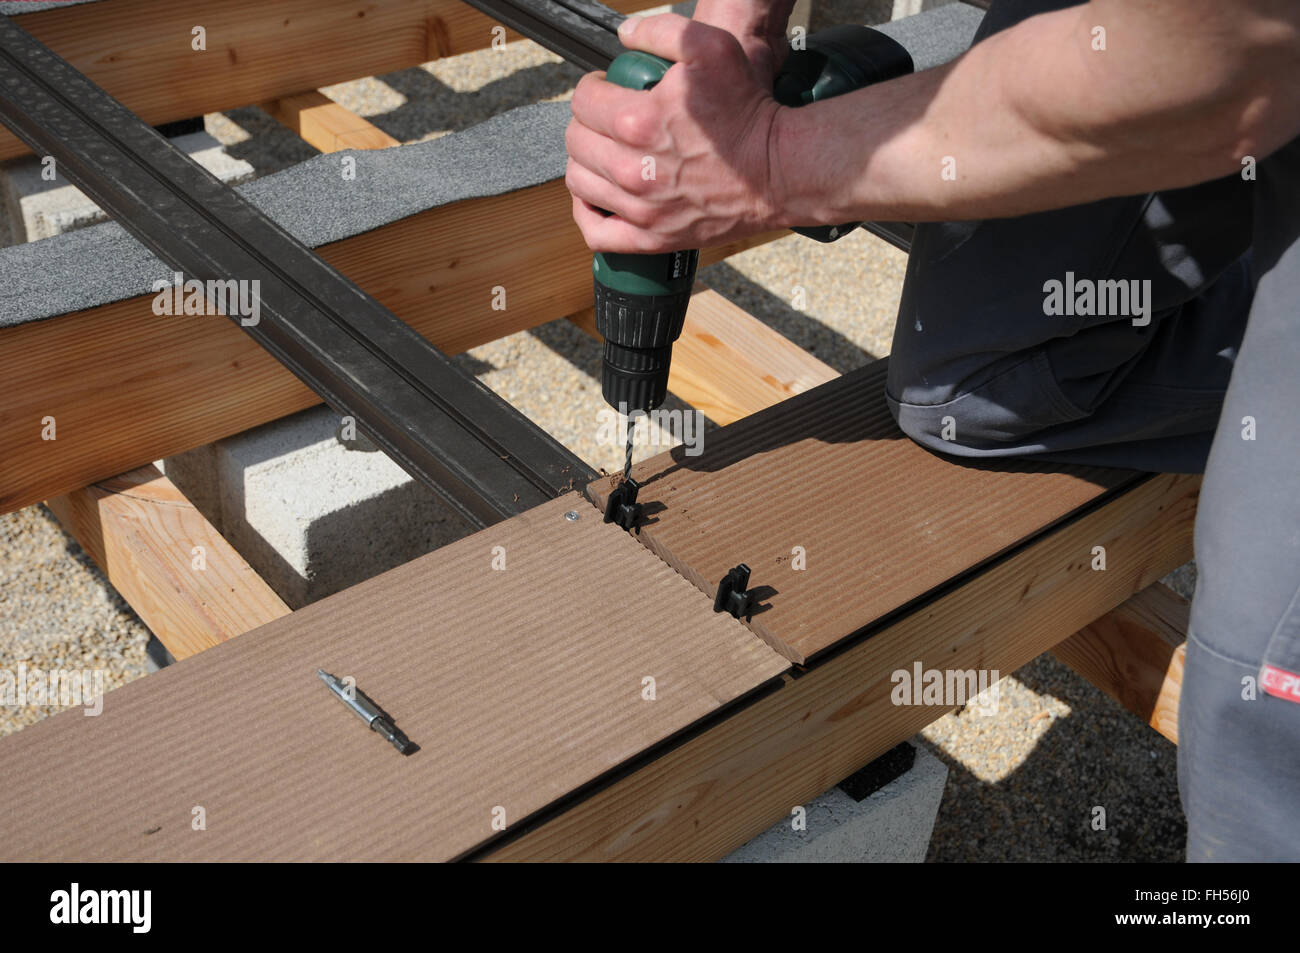 Building a wooden deck Stock Photo